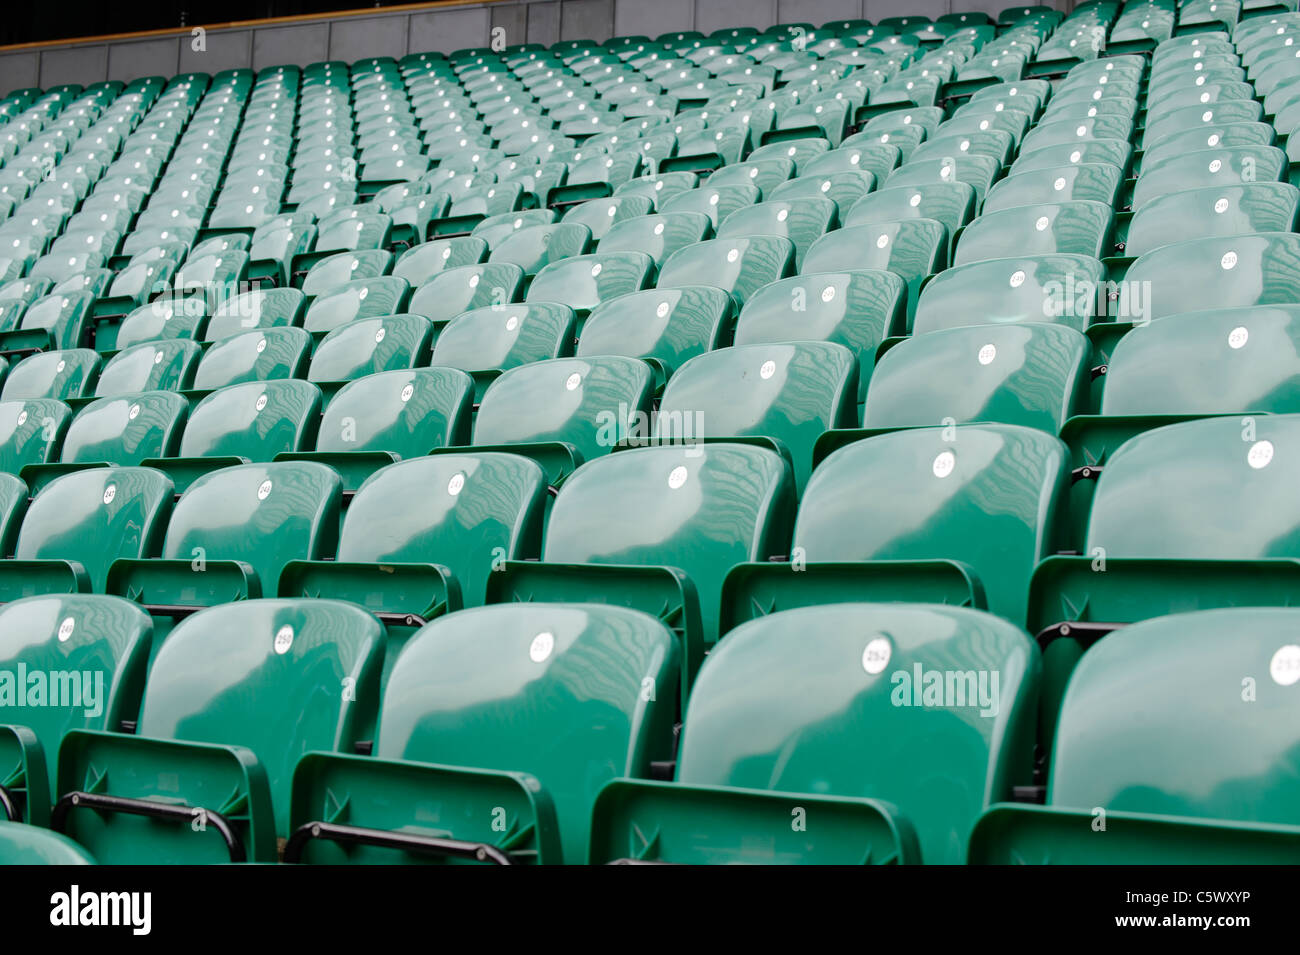 Rows of green plastic seats at the Twickenham Rugby stadium, home of the England Rugby Union team. Stock Photo